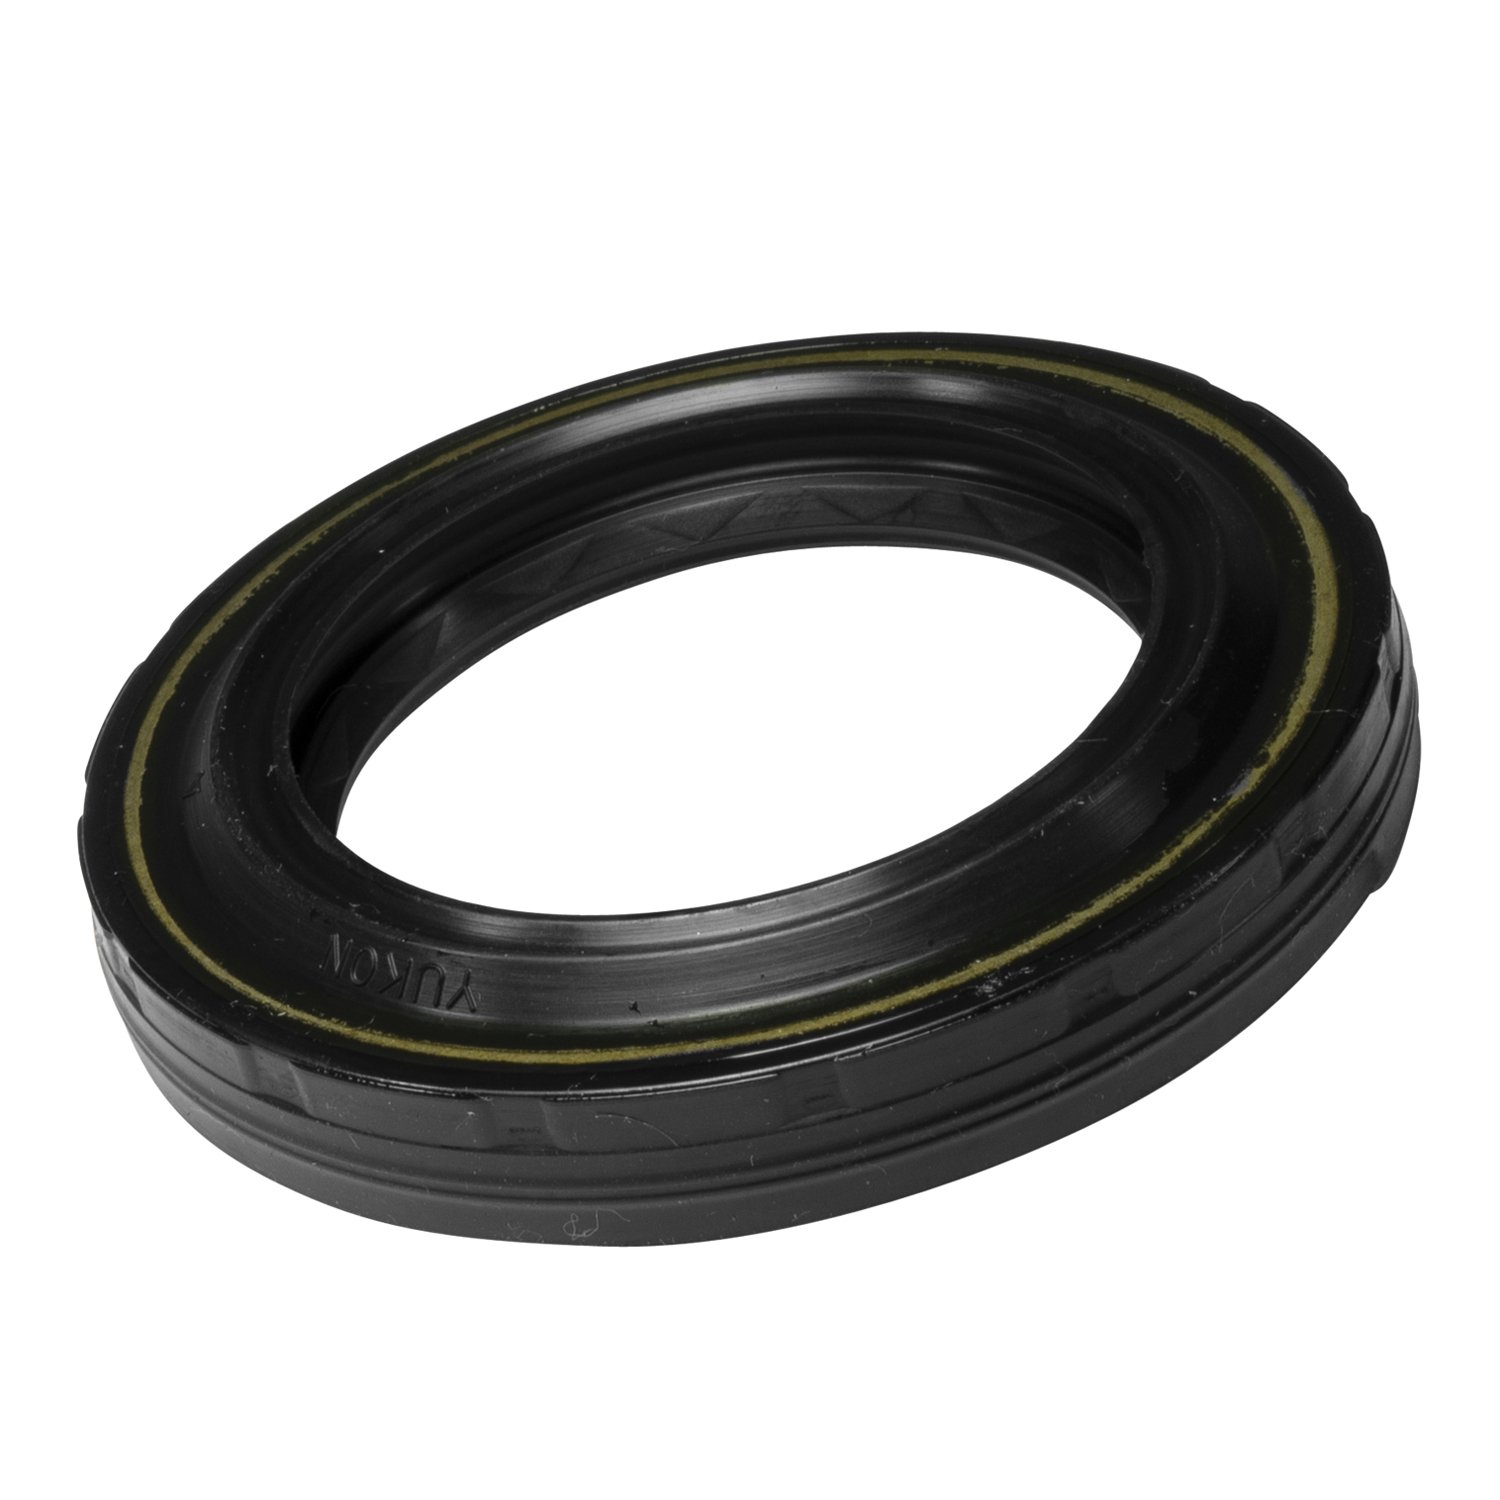 Outer axle seal used with set10 bearing, double lip seal. 